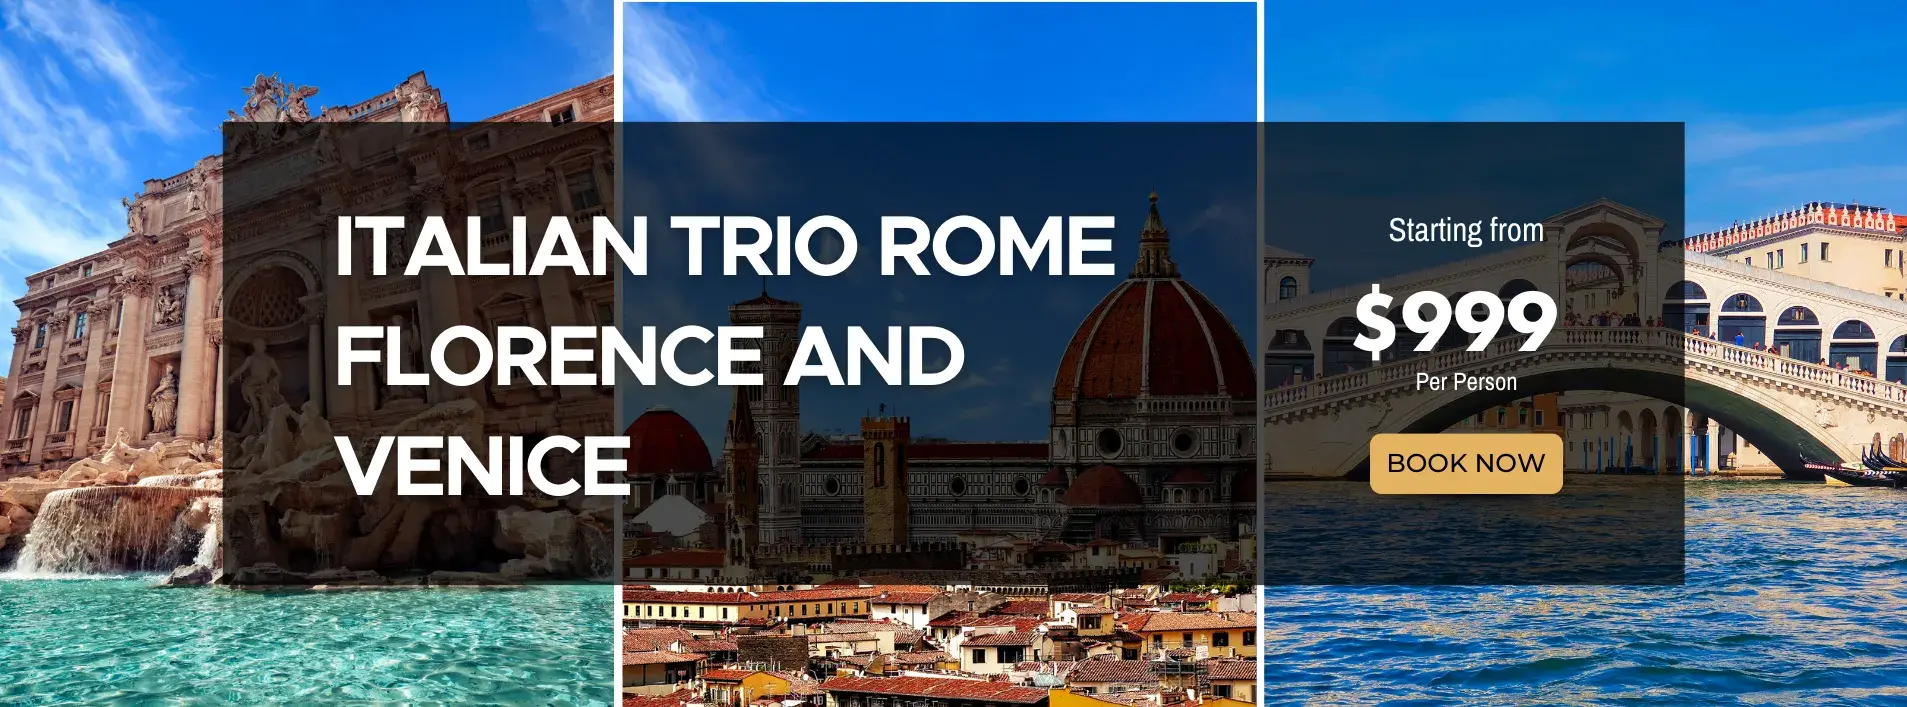 Italian Trio Rome Florence and Venice W/Air and Train